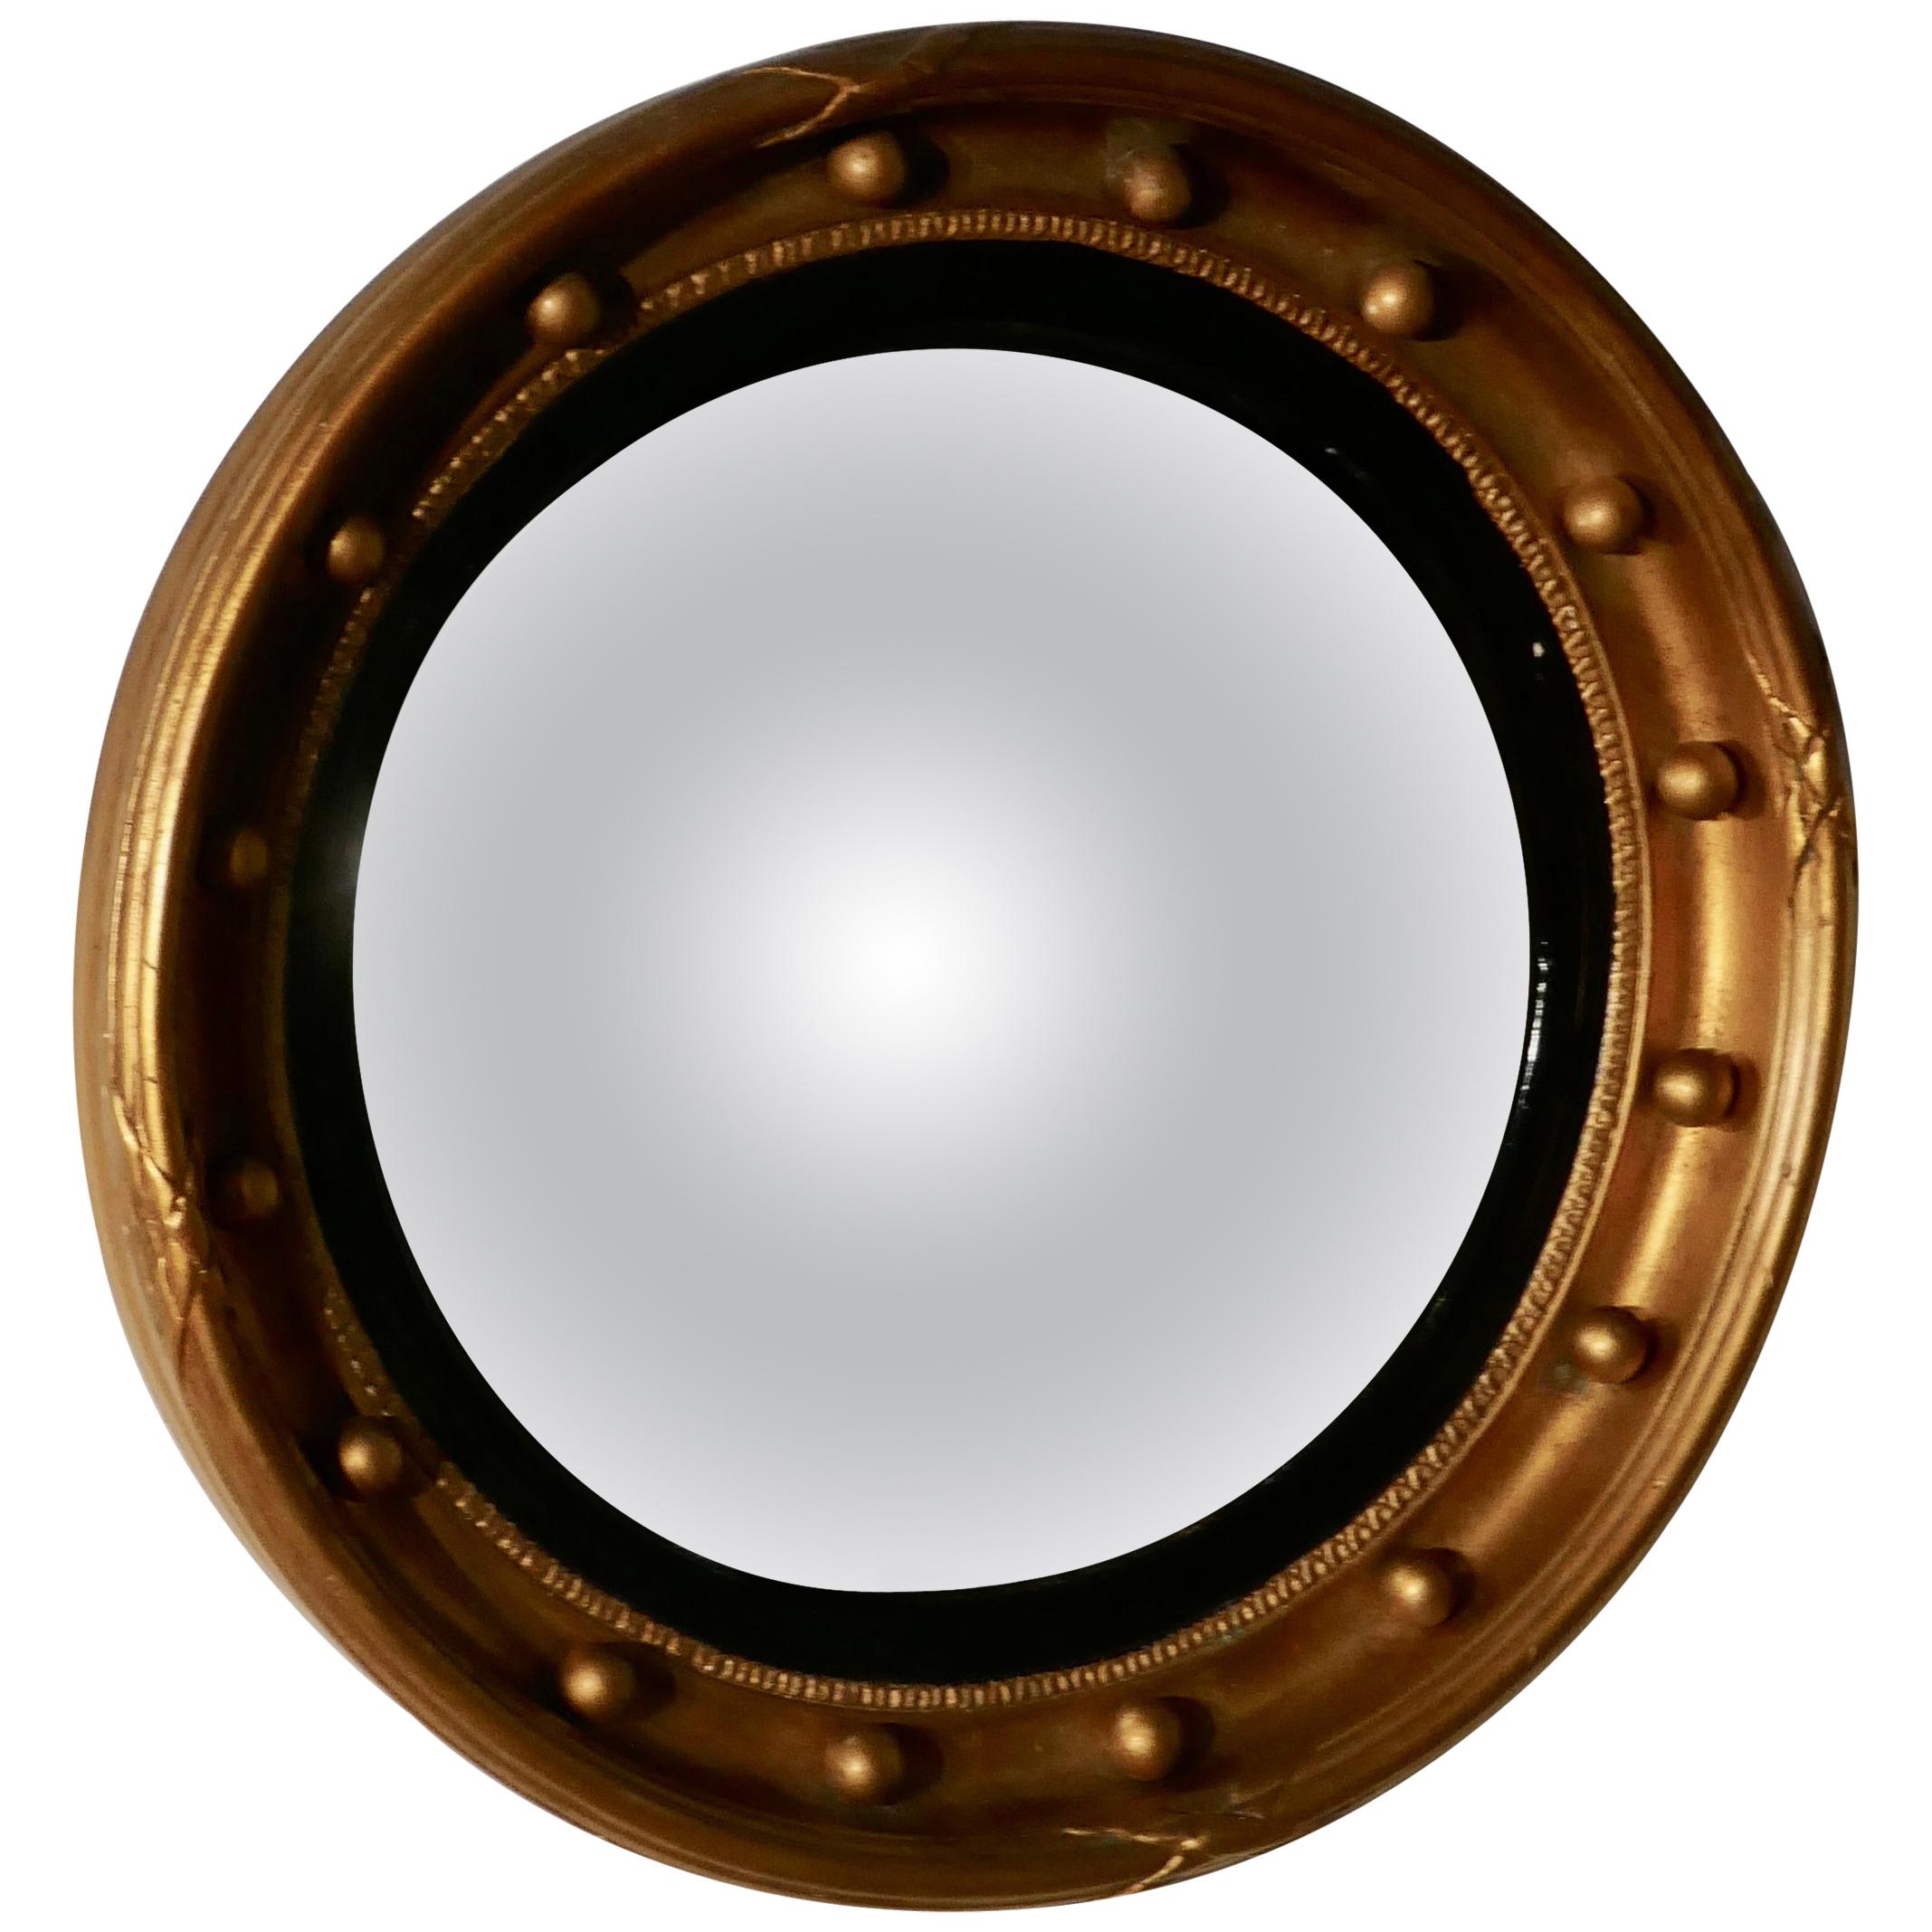 Regency convex gilt wall mirror


This stunning mirror has a deep gilt frame decorated with spheres, the convex glass is held with a reeded ebony mount

The large 3” round frame is in sound condition as is the original convex looking glass
The